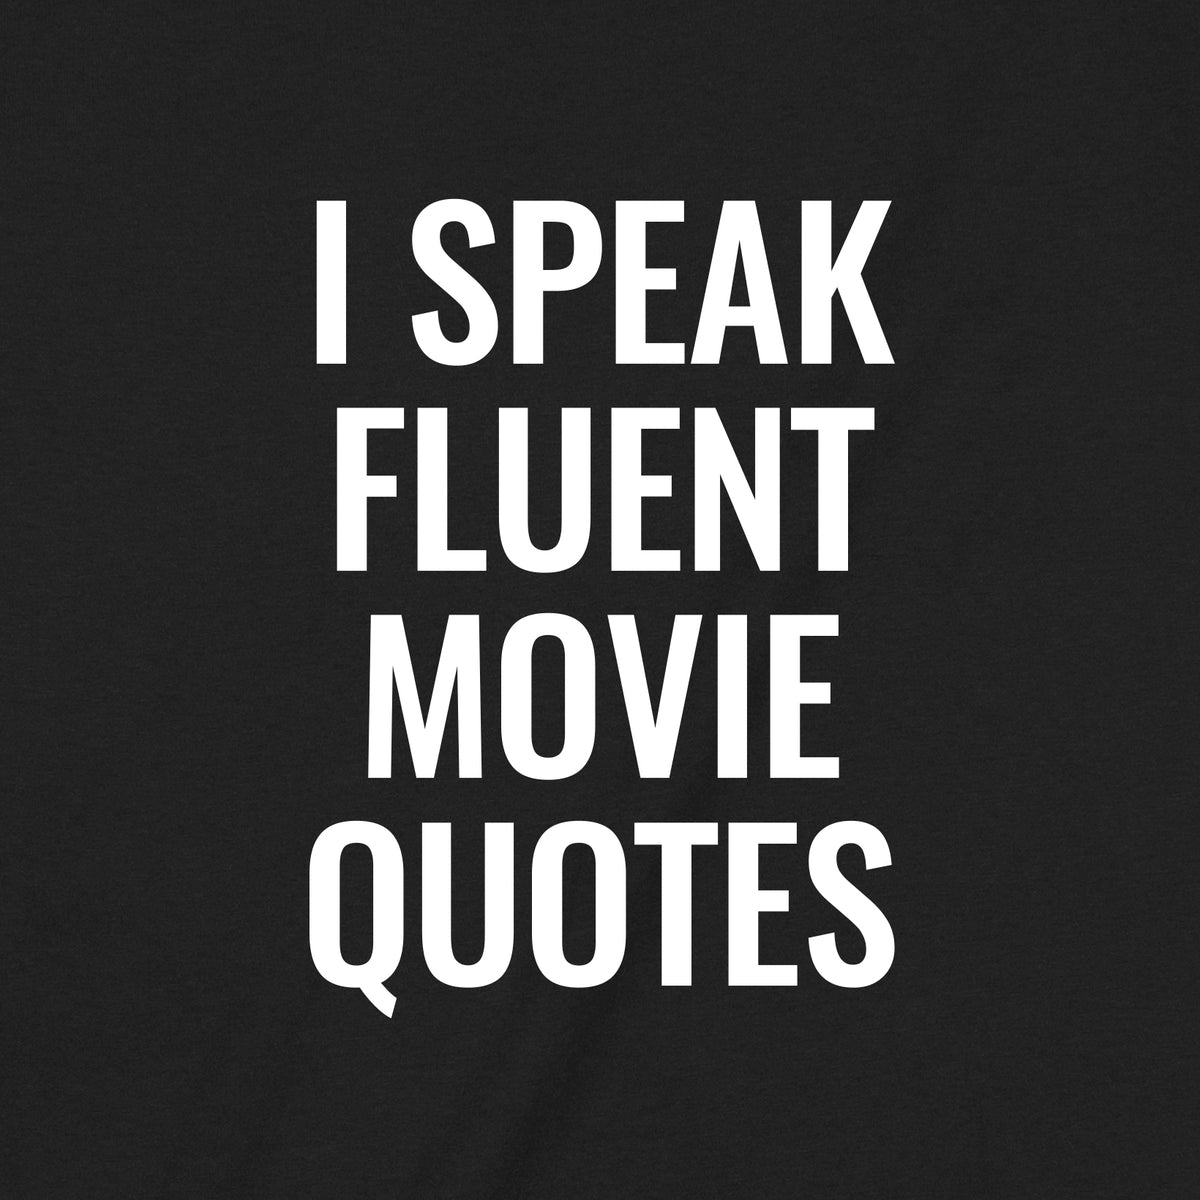 "Movie Quotes" Premium Midweight Ringspun Cotton T-Shirt - Mens/Womens Fits